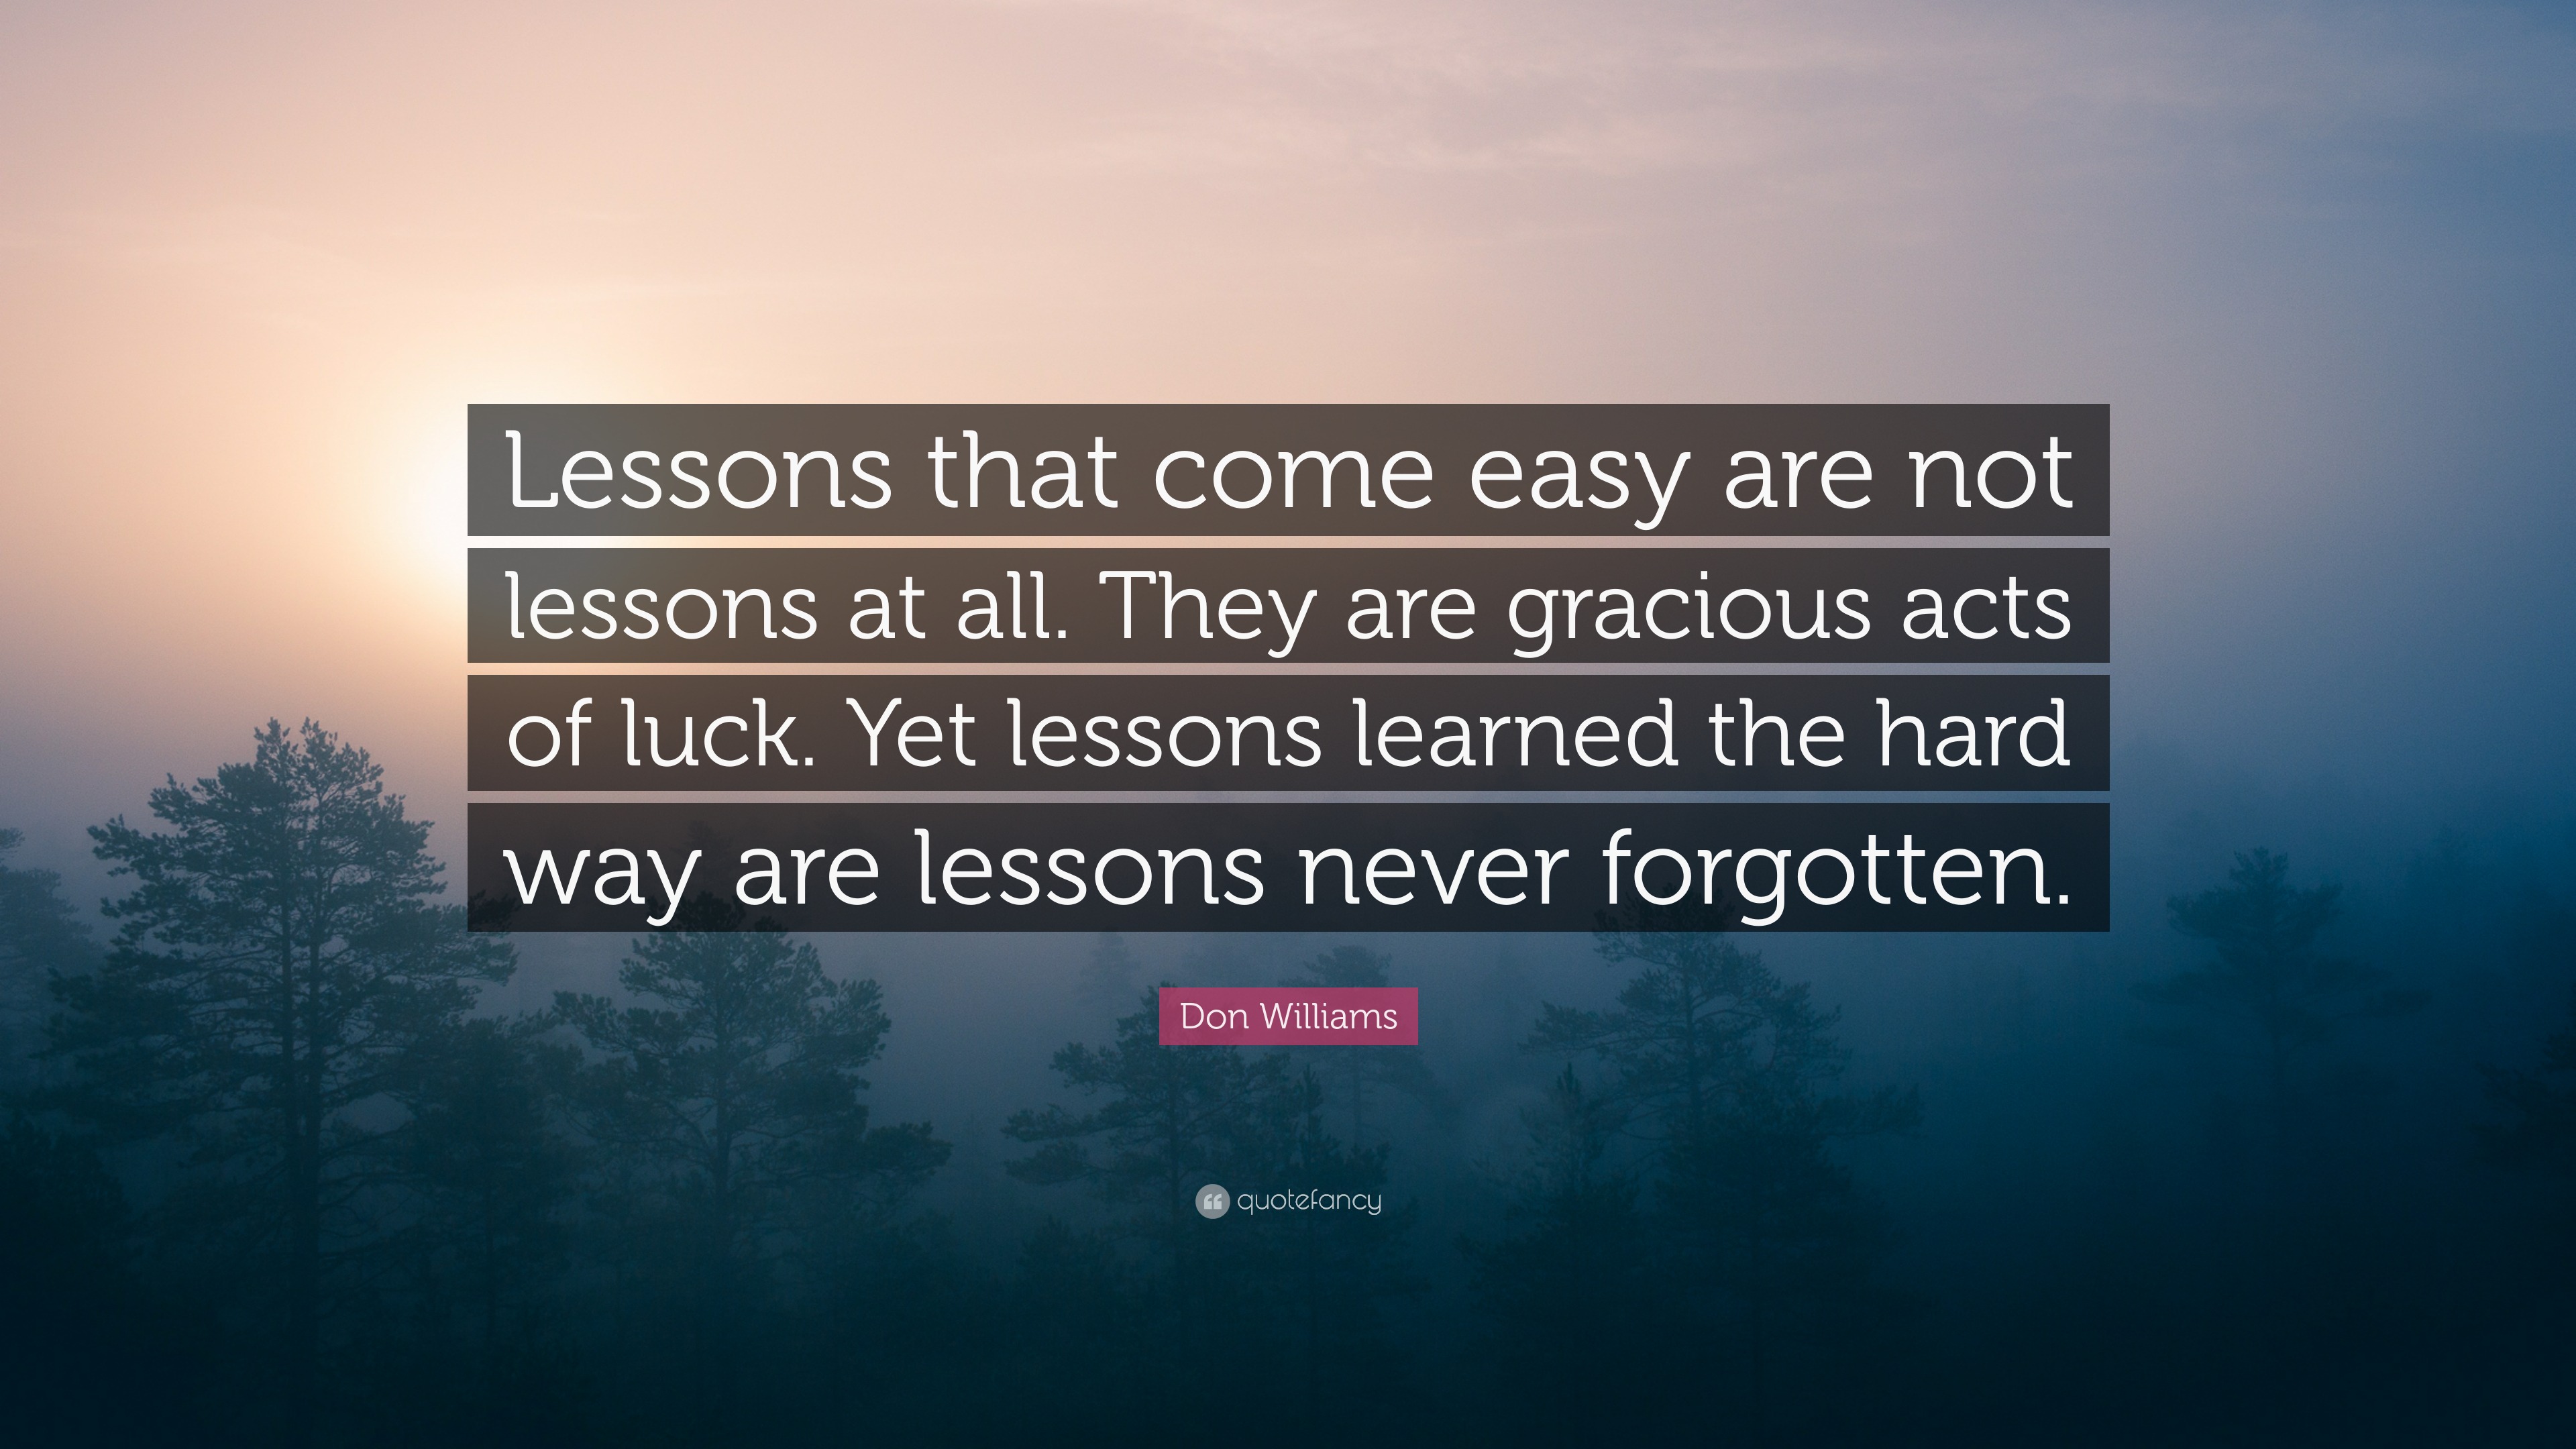 Don Williams Quote: “Lessons that come easy are not lessons at all. They  are gracious acts of luck. Yet lessons learned the hard way are less”